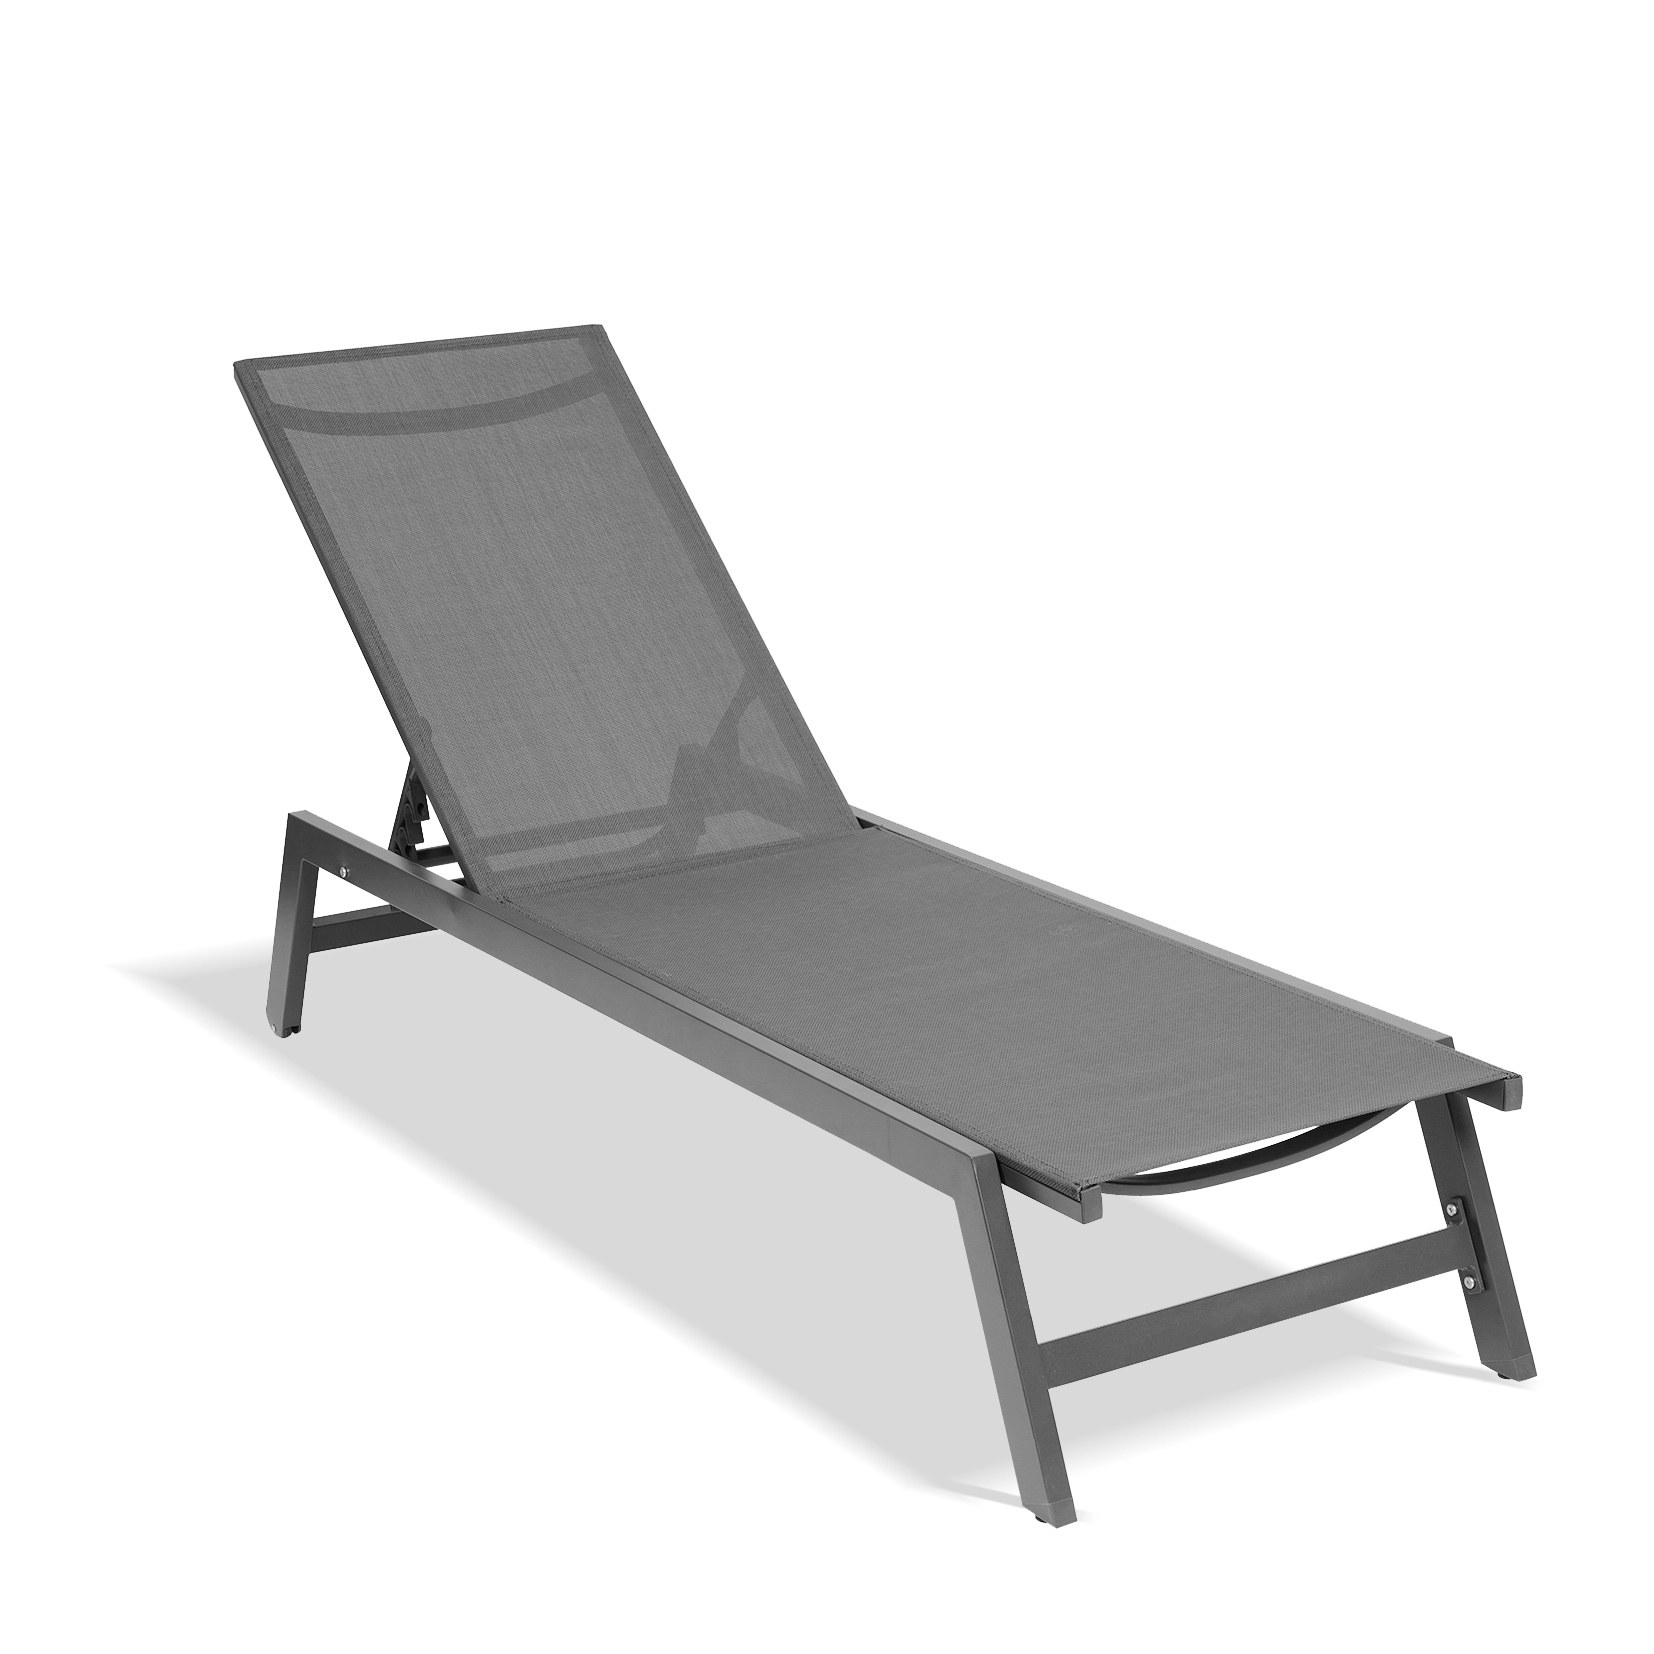 Outdoor Patio Garden Furniture  5-position Adjustable Aluminum Recliner  All Weather For Patio  Beach  Yard  Pool